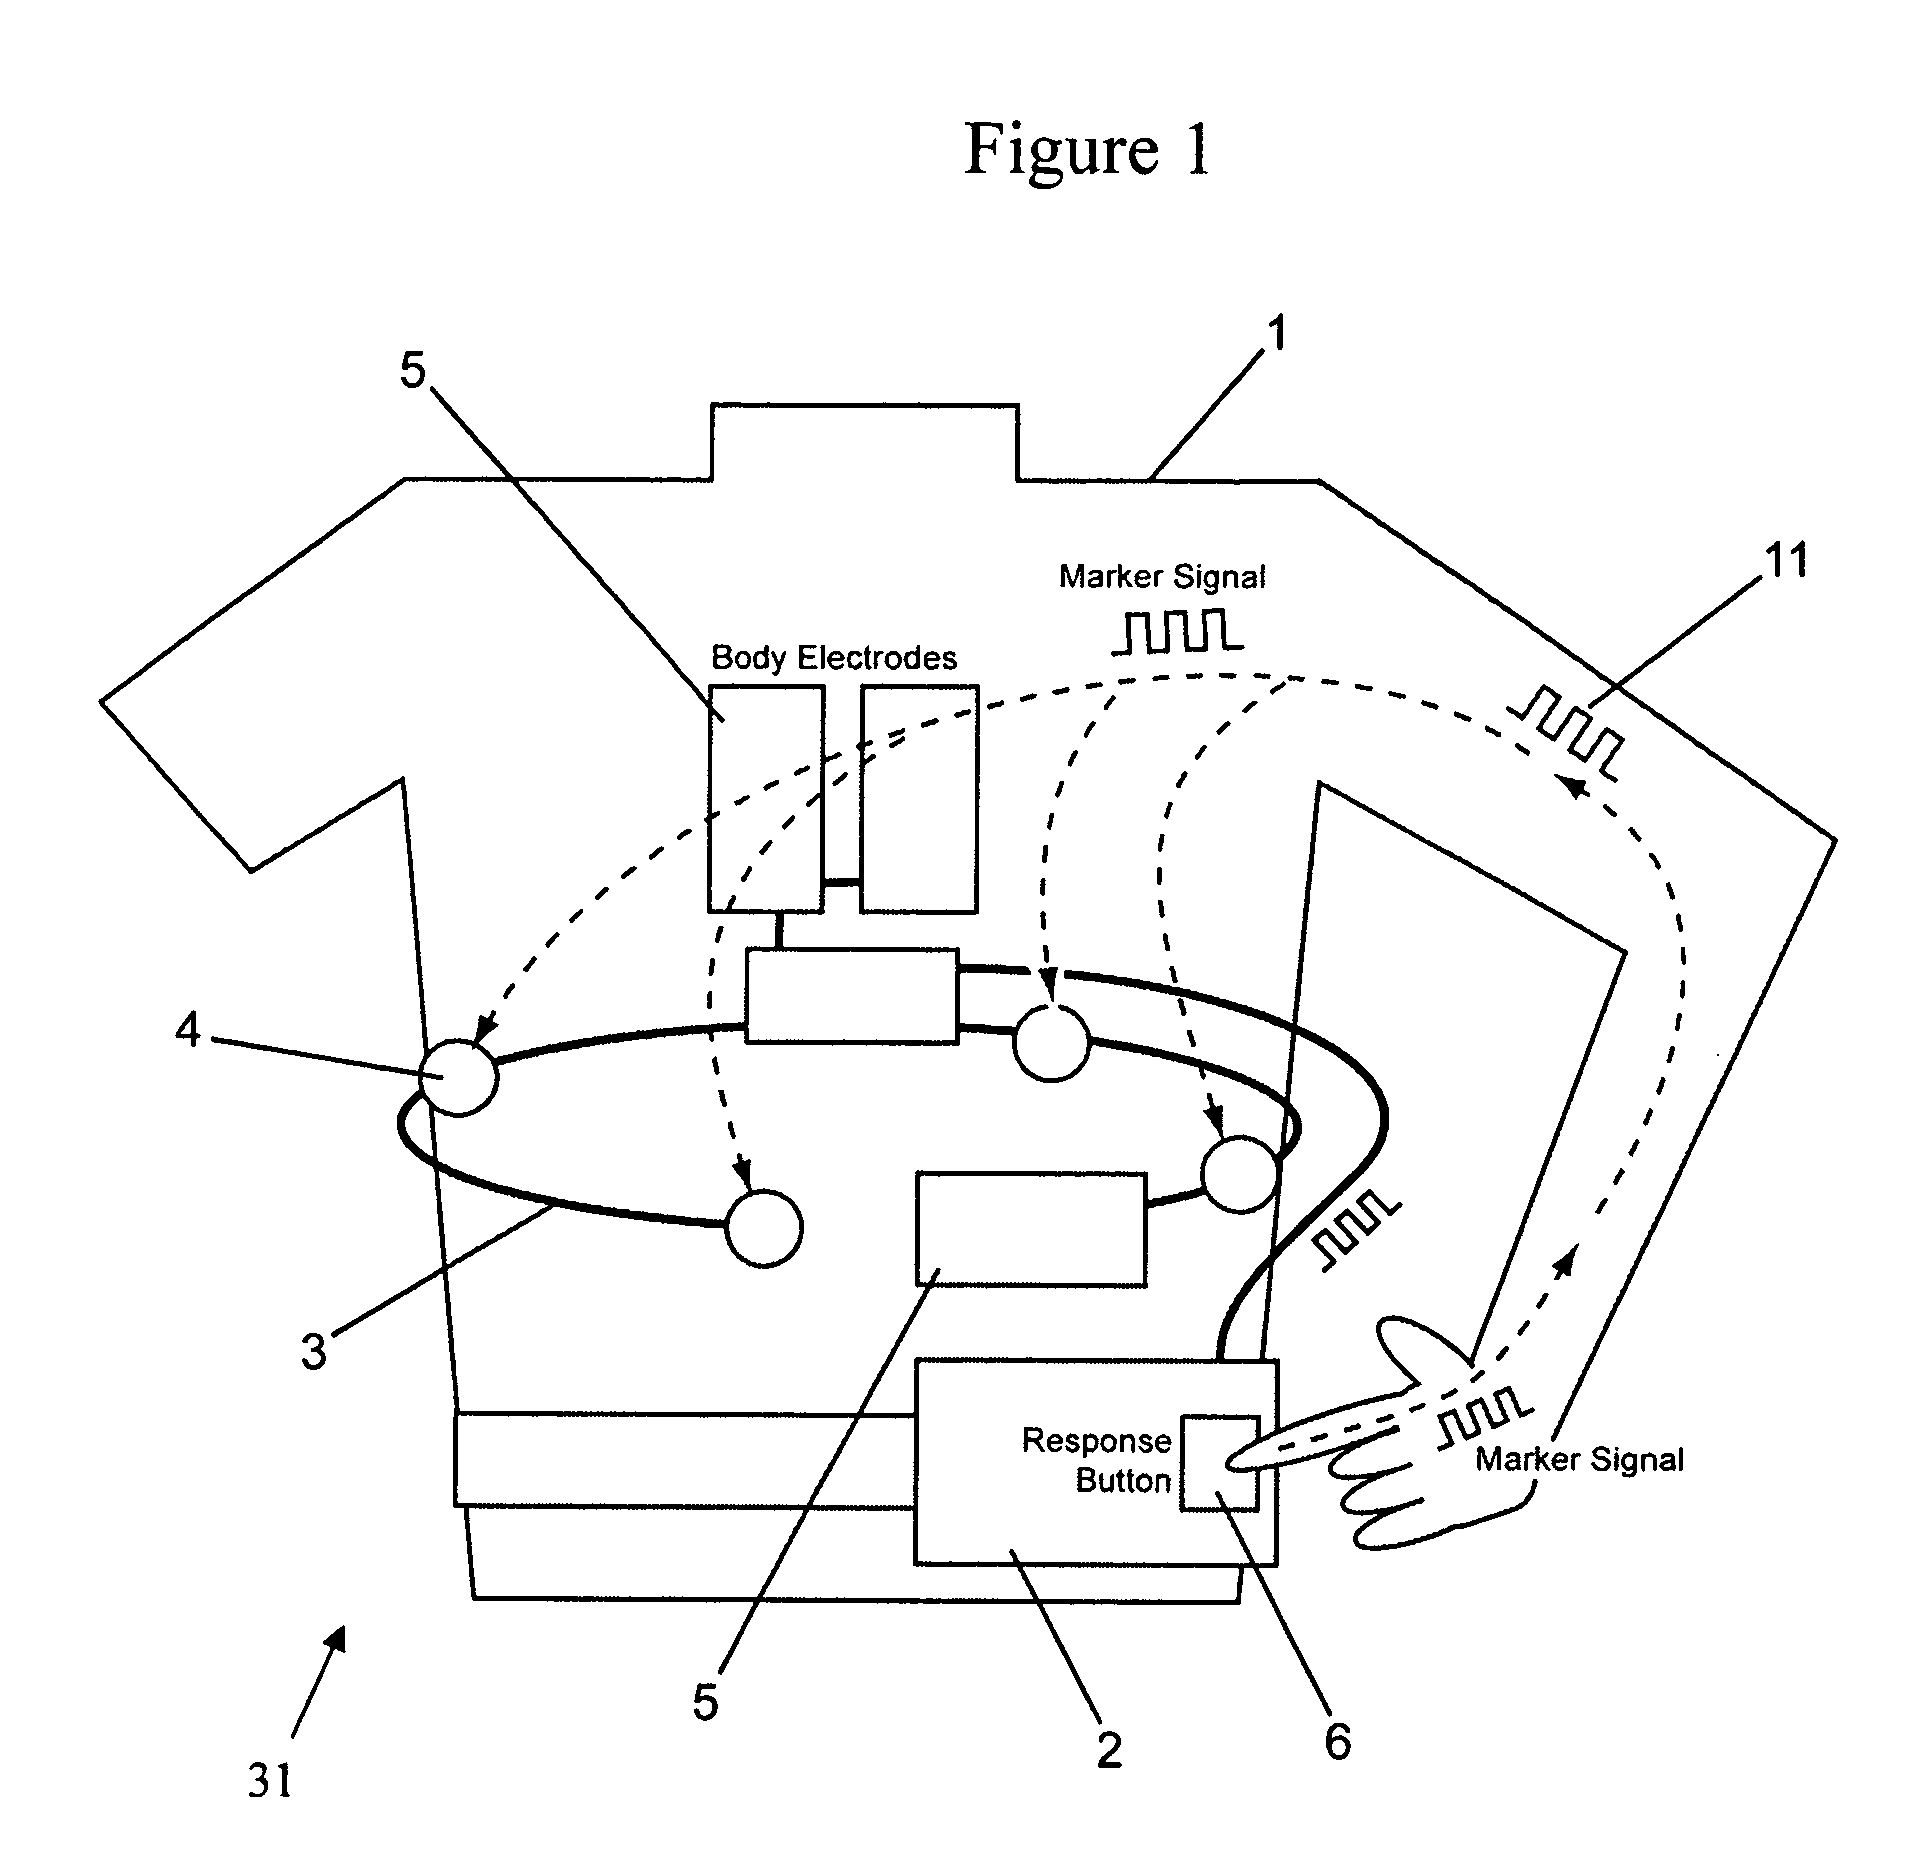 Medical device configured to test for user responsiveness